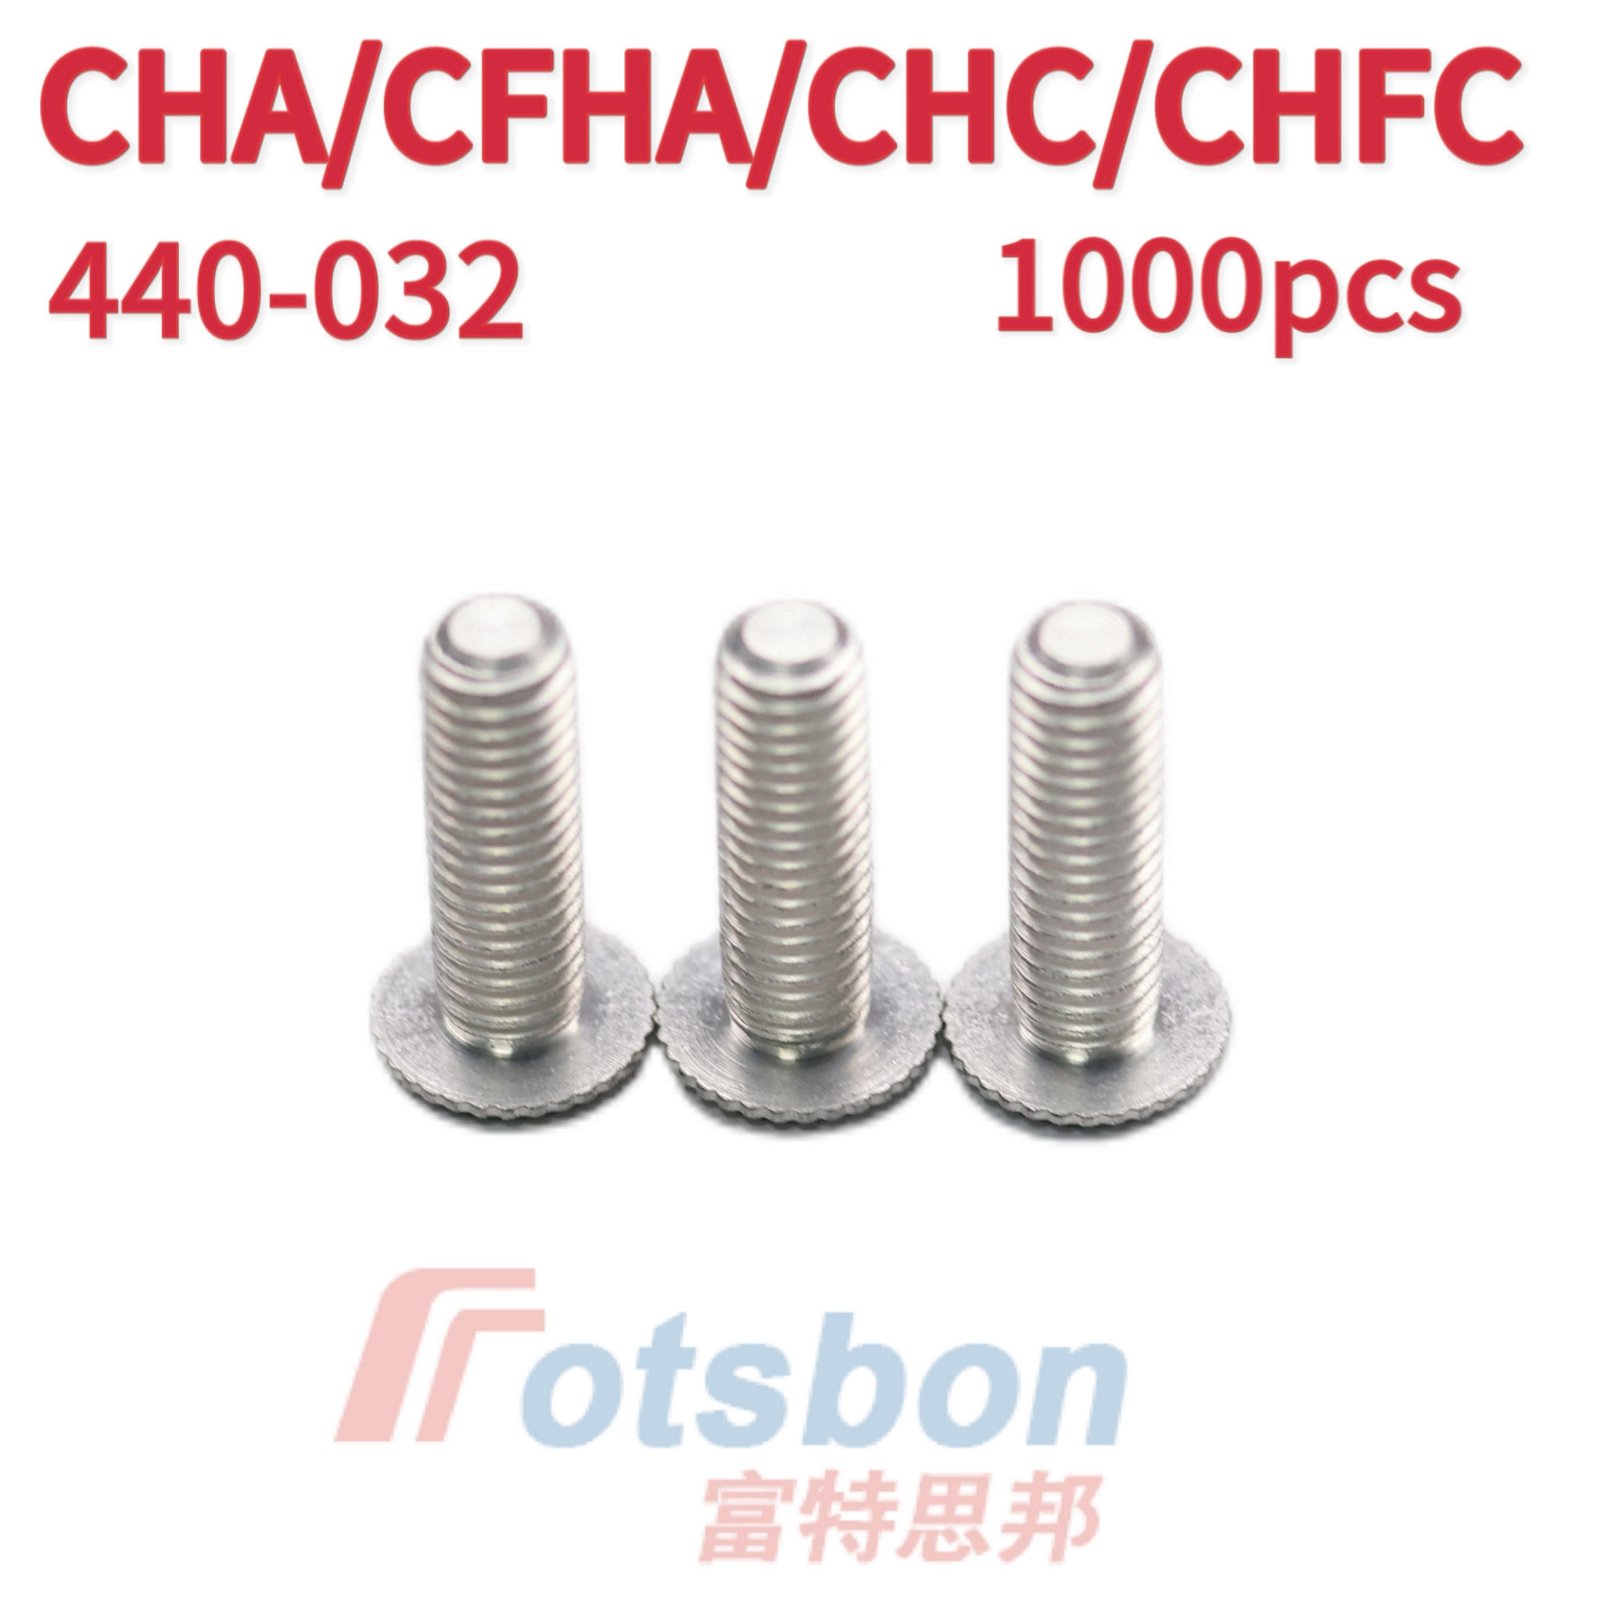 CFHA-M4-16 Aluminum Concealed Head Studs Reverse Installation Can Be Anodized